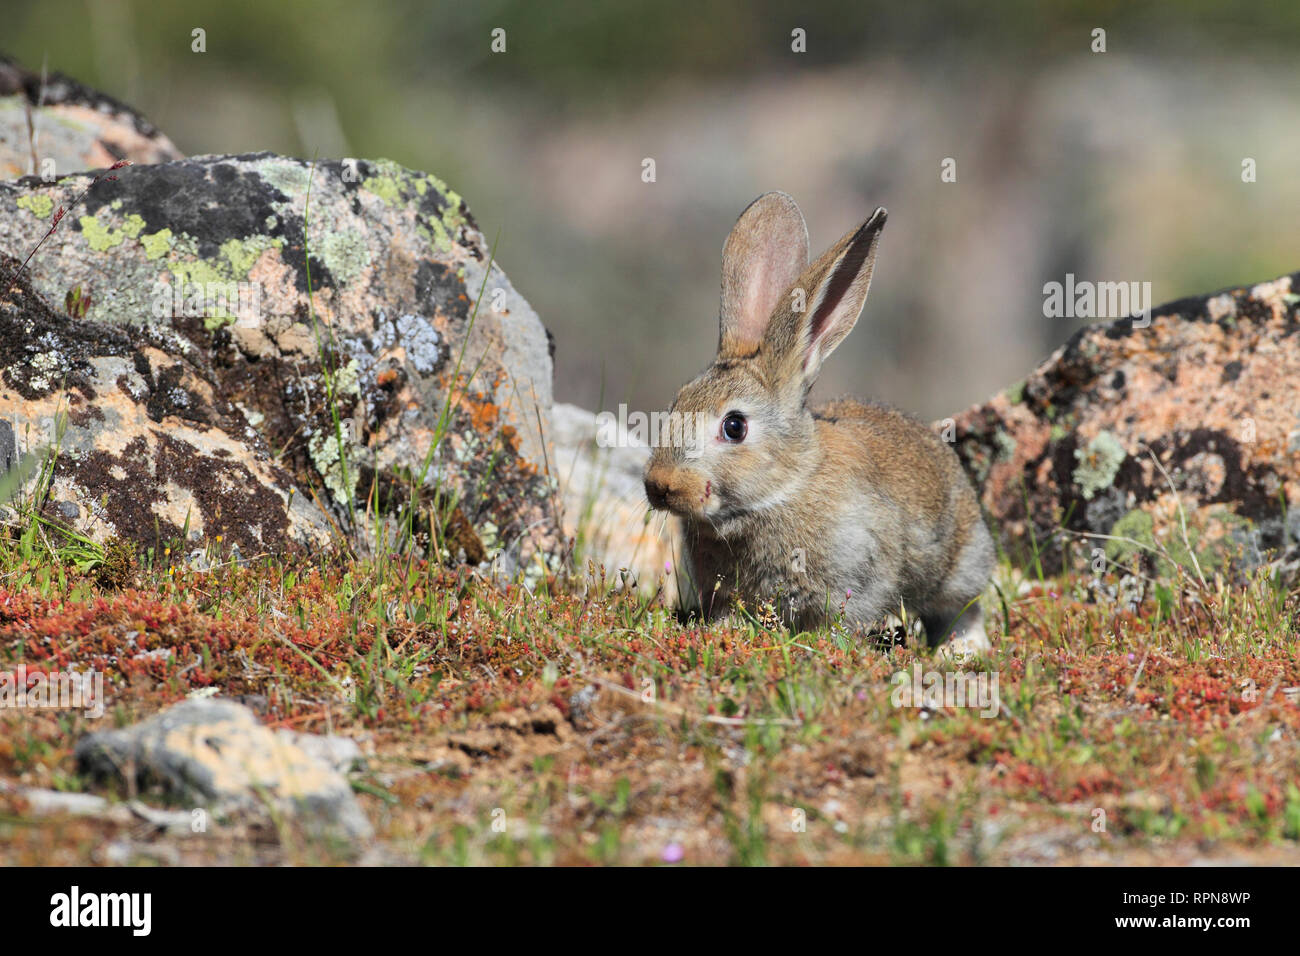 zoology / animals, mammal (mammalia), Rabbit, Oryctolagus cuniculus, Spain, Additional-Rights-Clearance-Info-Not-Available Stock Photo